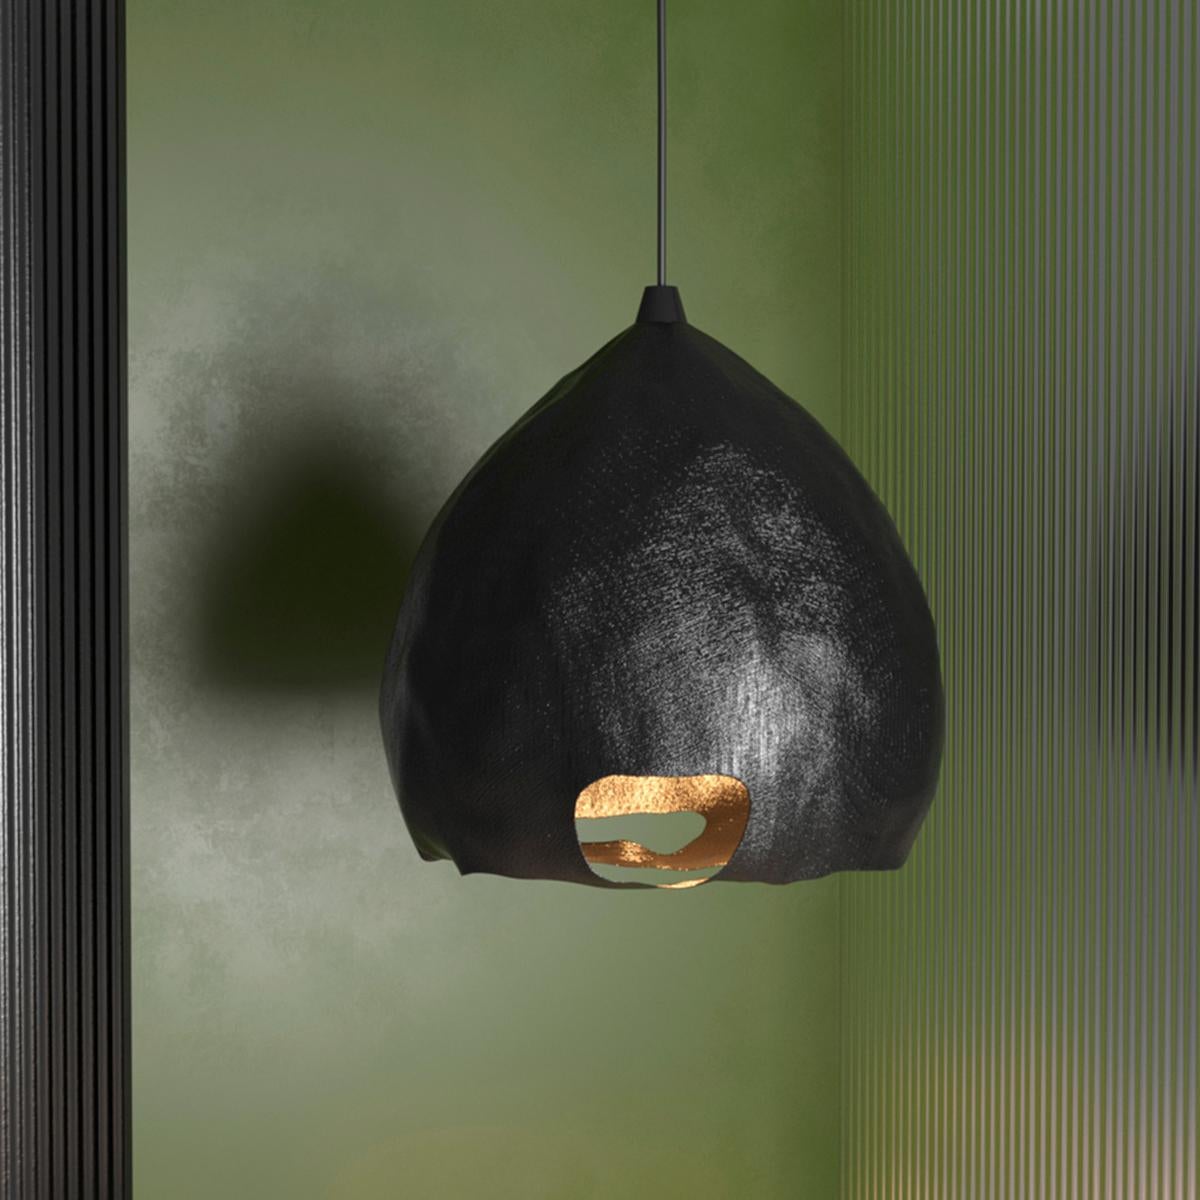 Makivka ceramic pendant lamp 85 by Makhno
Dimensions: D 80 x H 85 cm
Materials: Copper
Also available in ceramic.

All our lamps can be wired according to each country. If sold to the USA it will be wired for the USA for instance.

Makivka